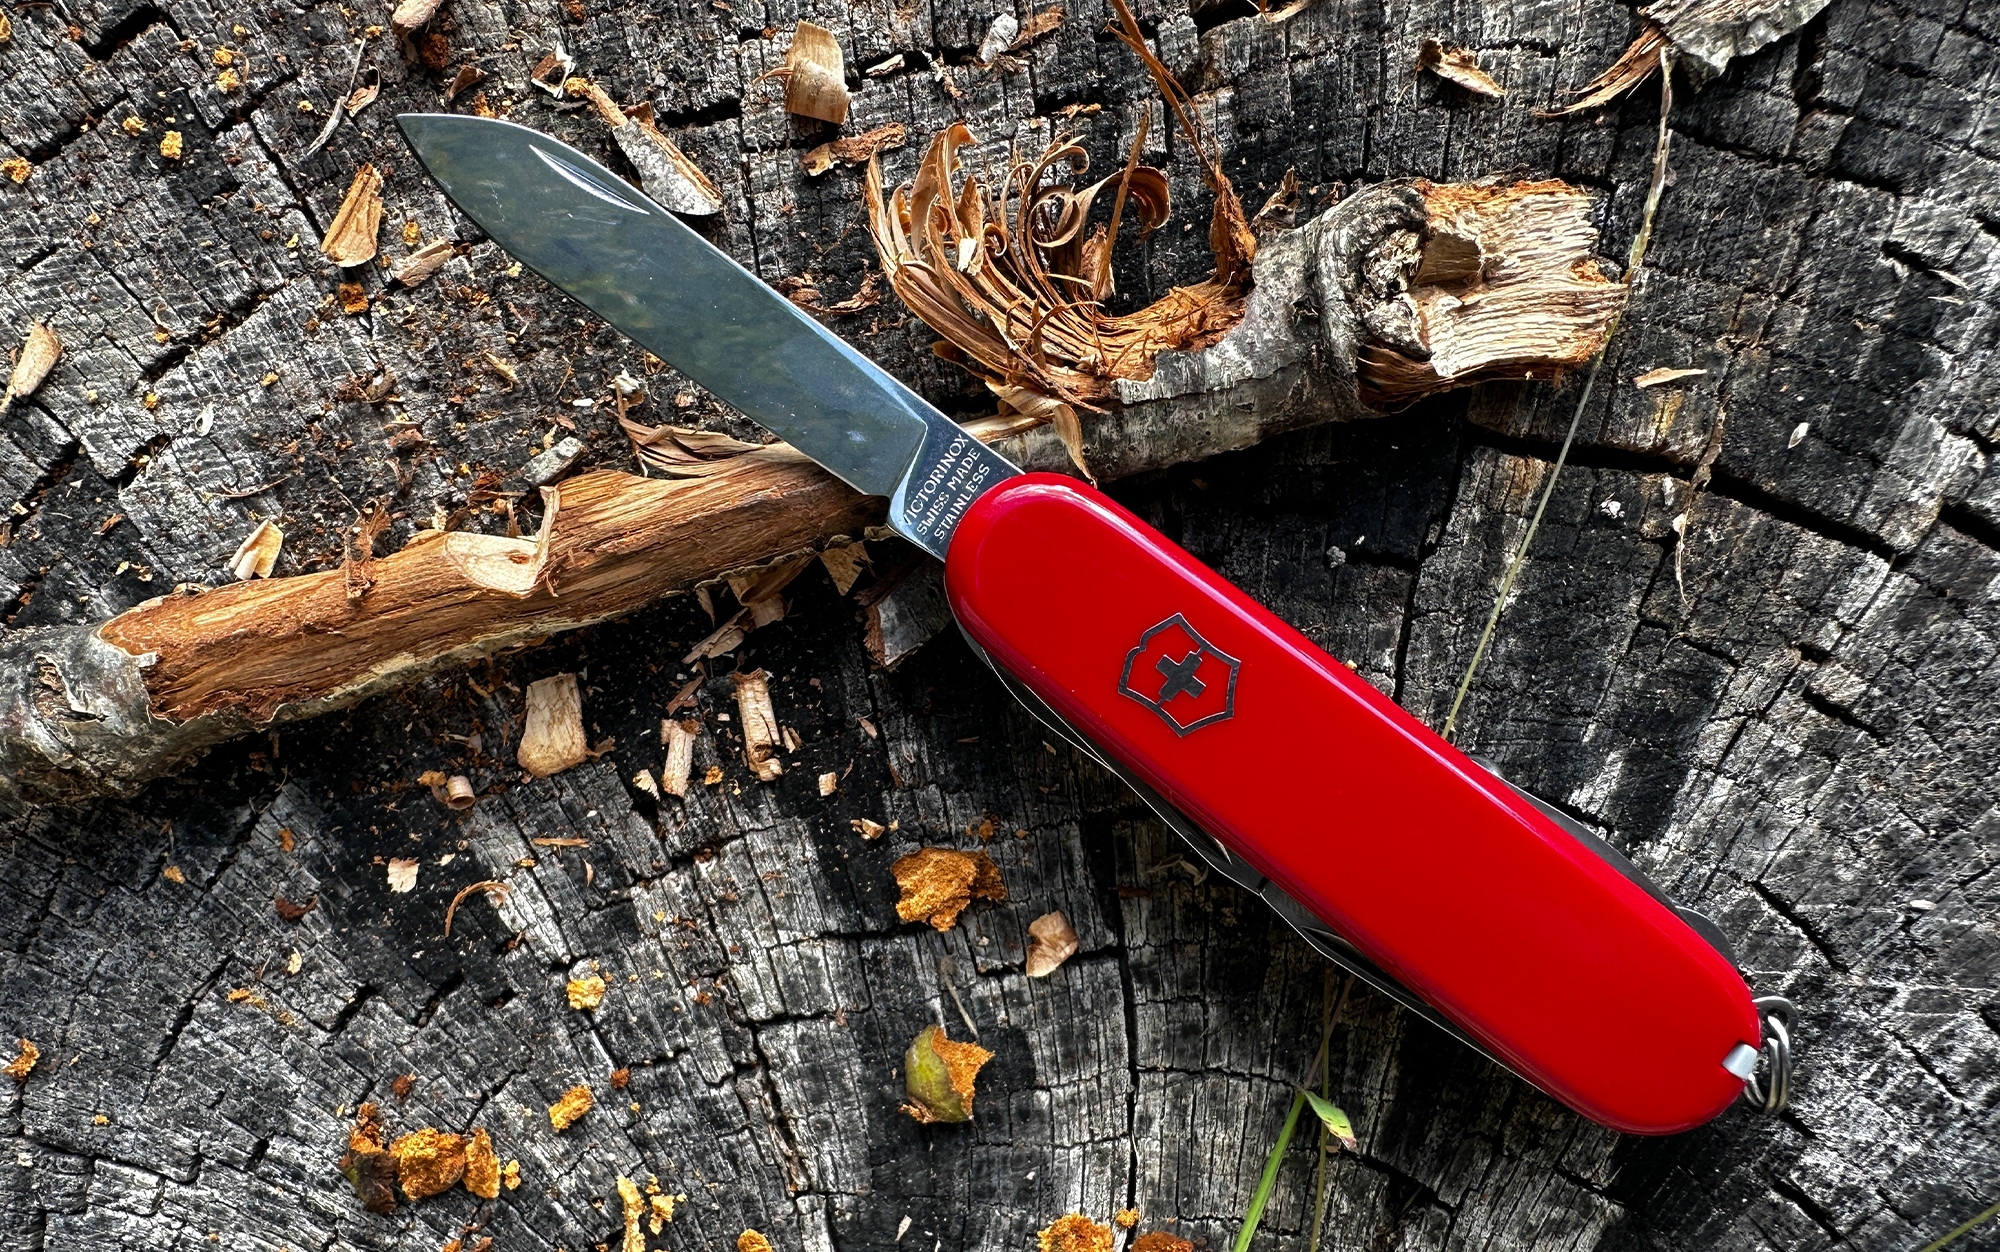 We tested the best Swiss army knives.